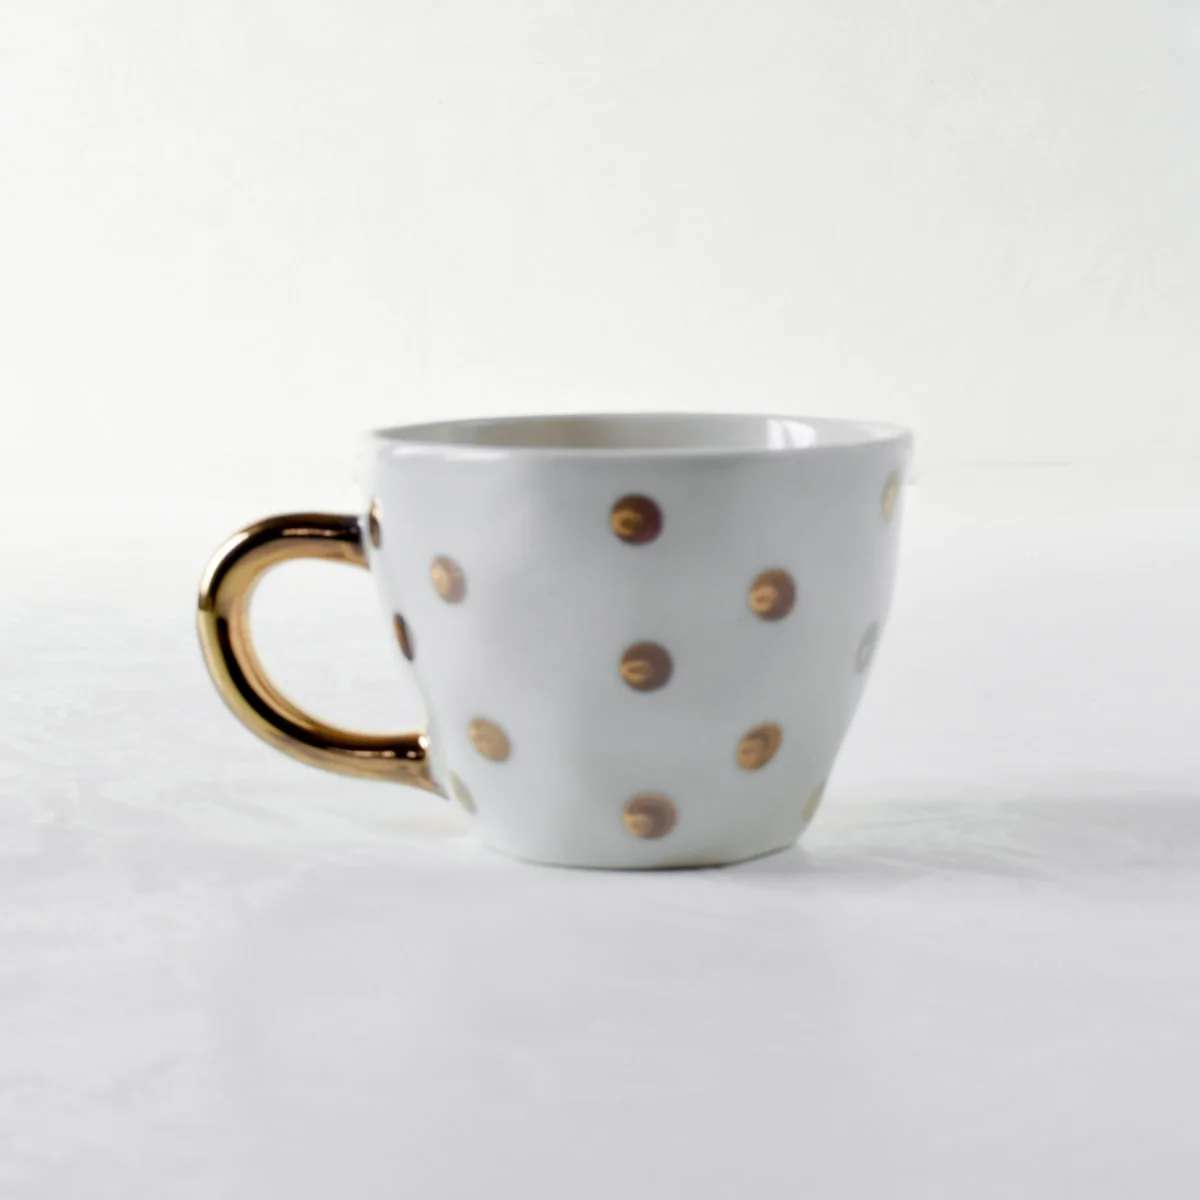 Dalmatian Ceramic Cup with Golden Handle - Set of 2